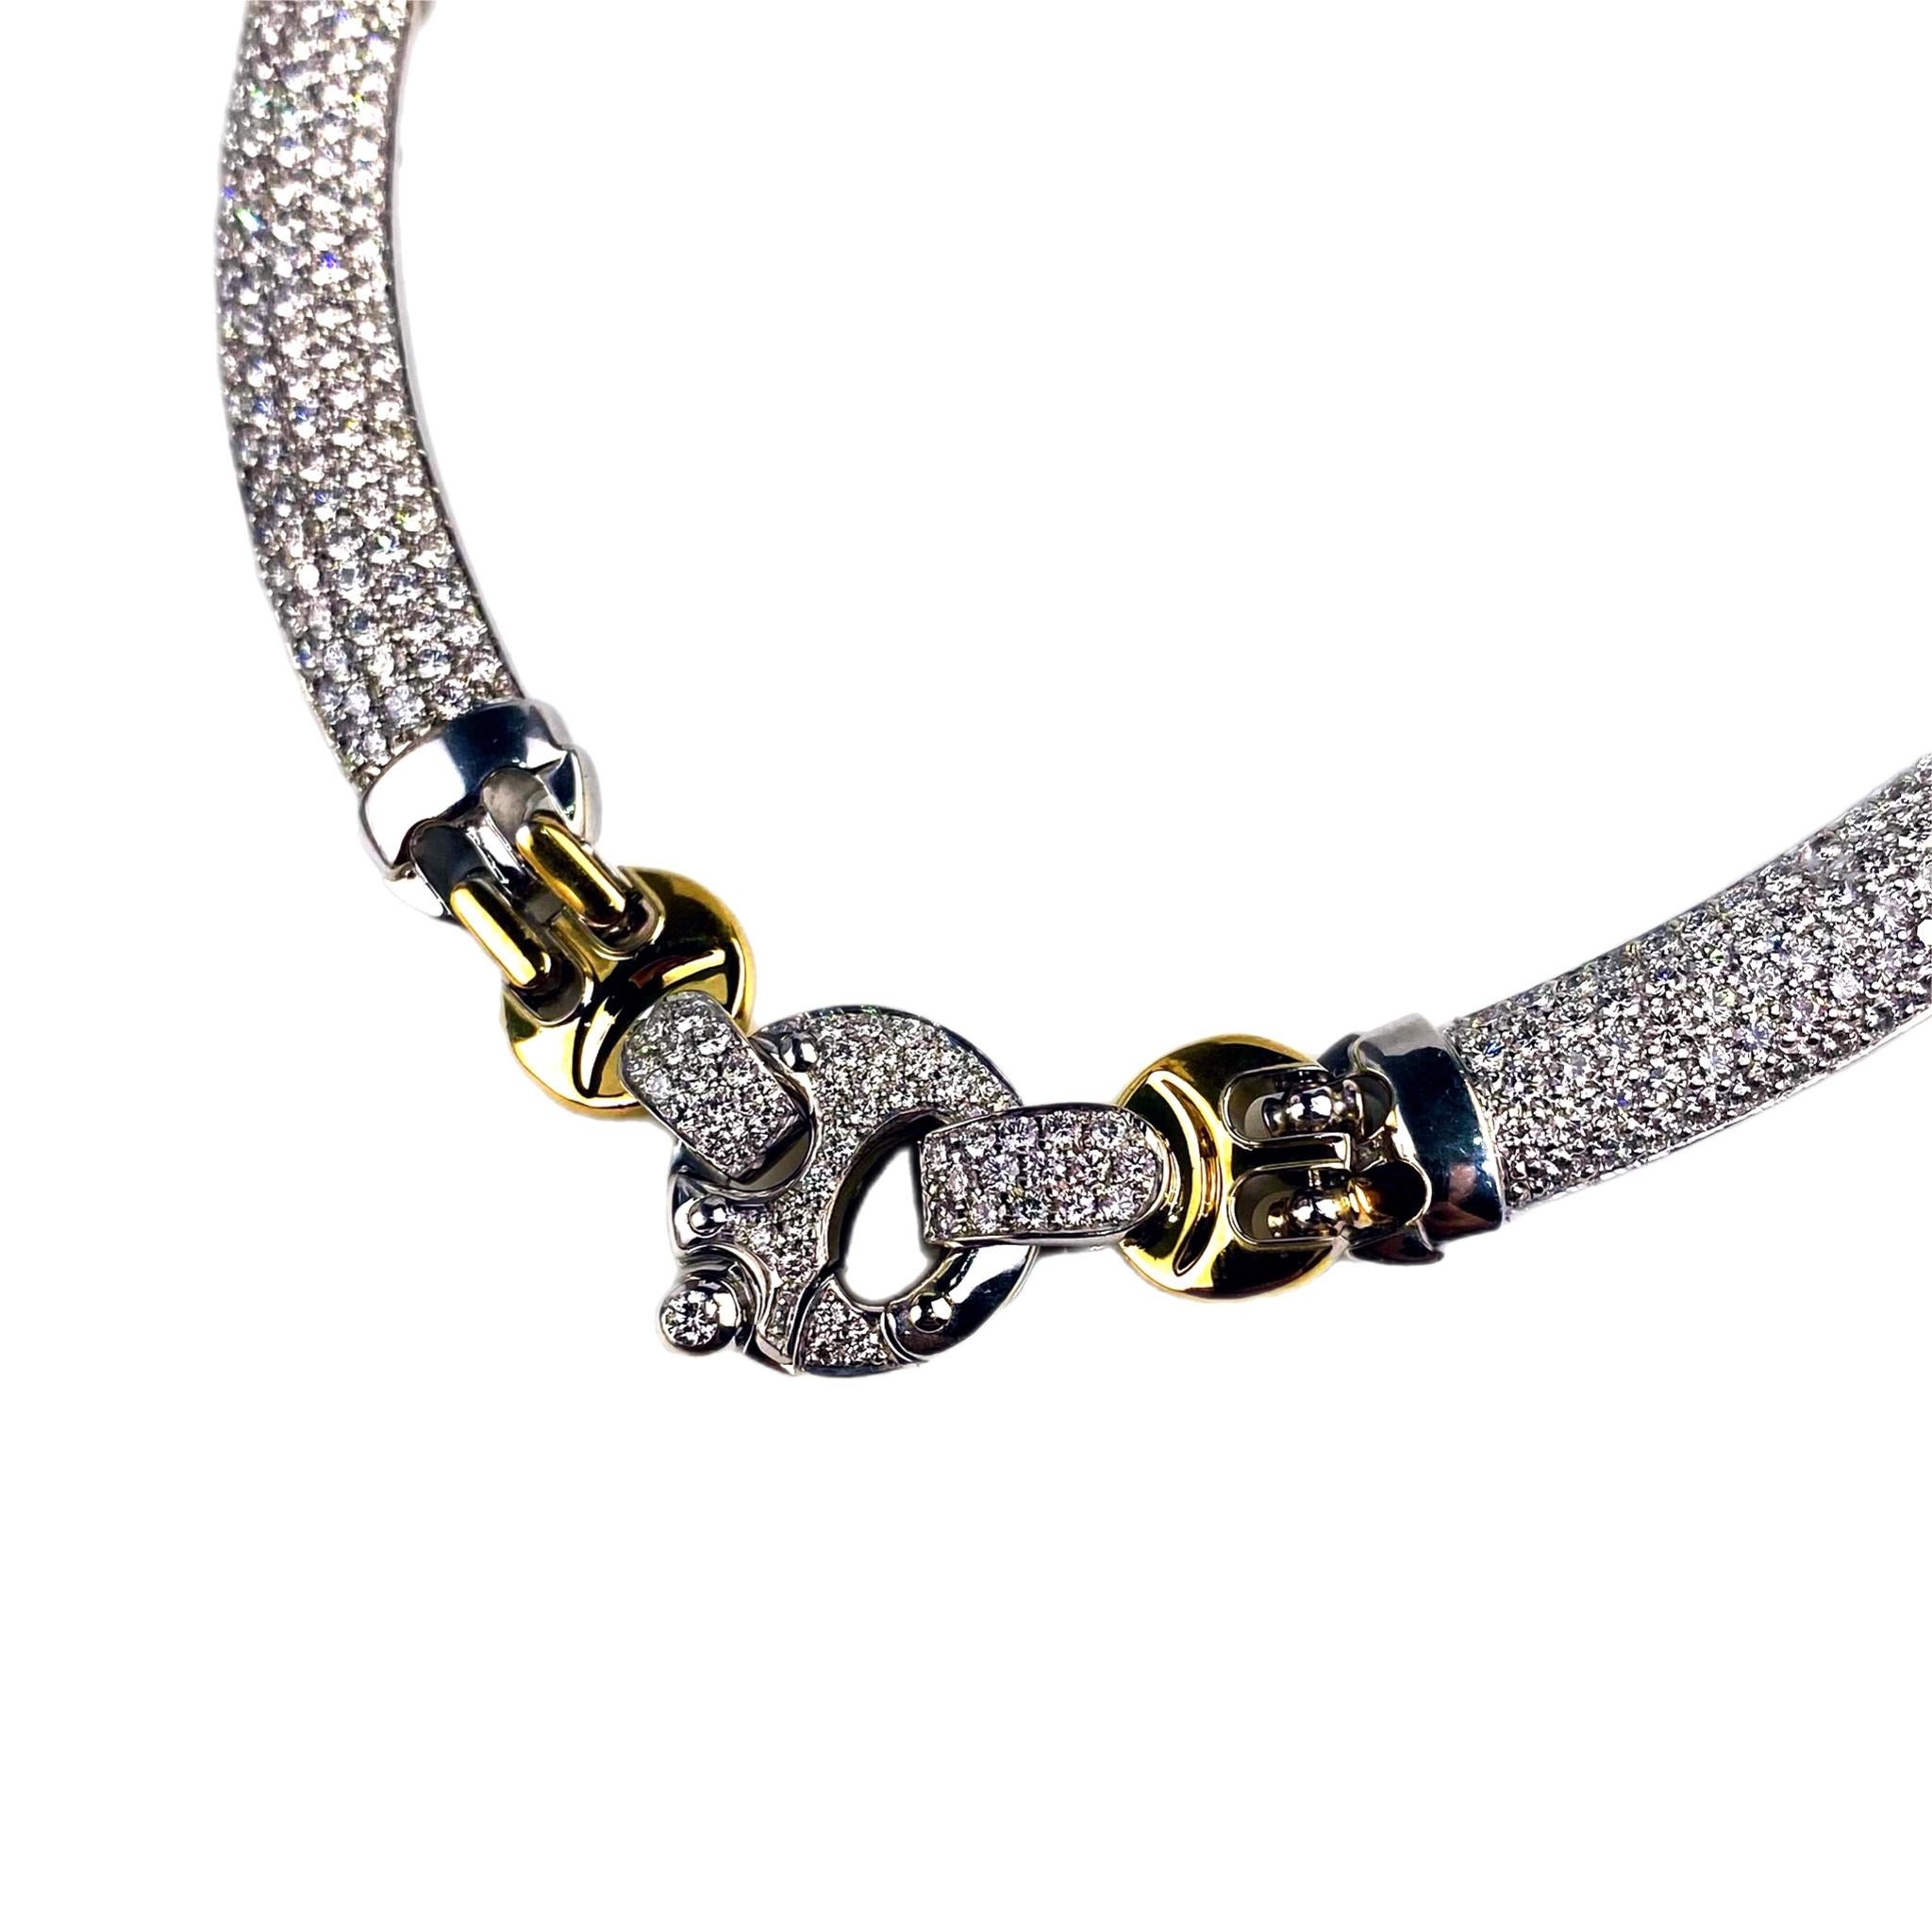 Baraka Necklace
18K White and Yellow Gold
Weight: 93.17 grams
Diamonds: 6.50ctw